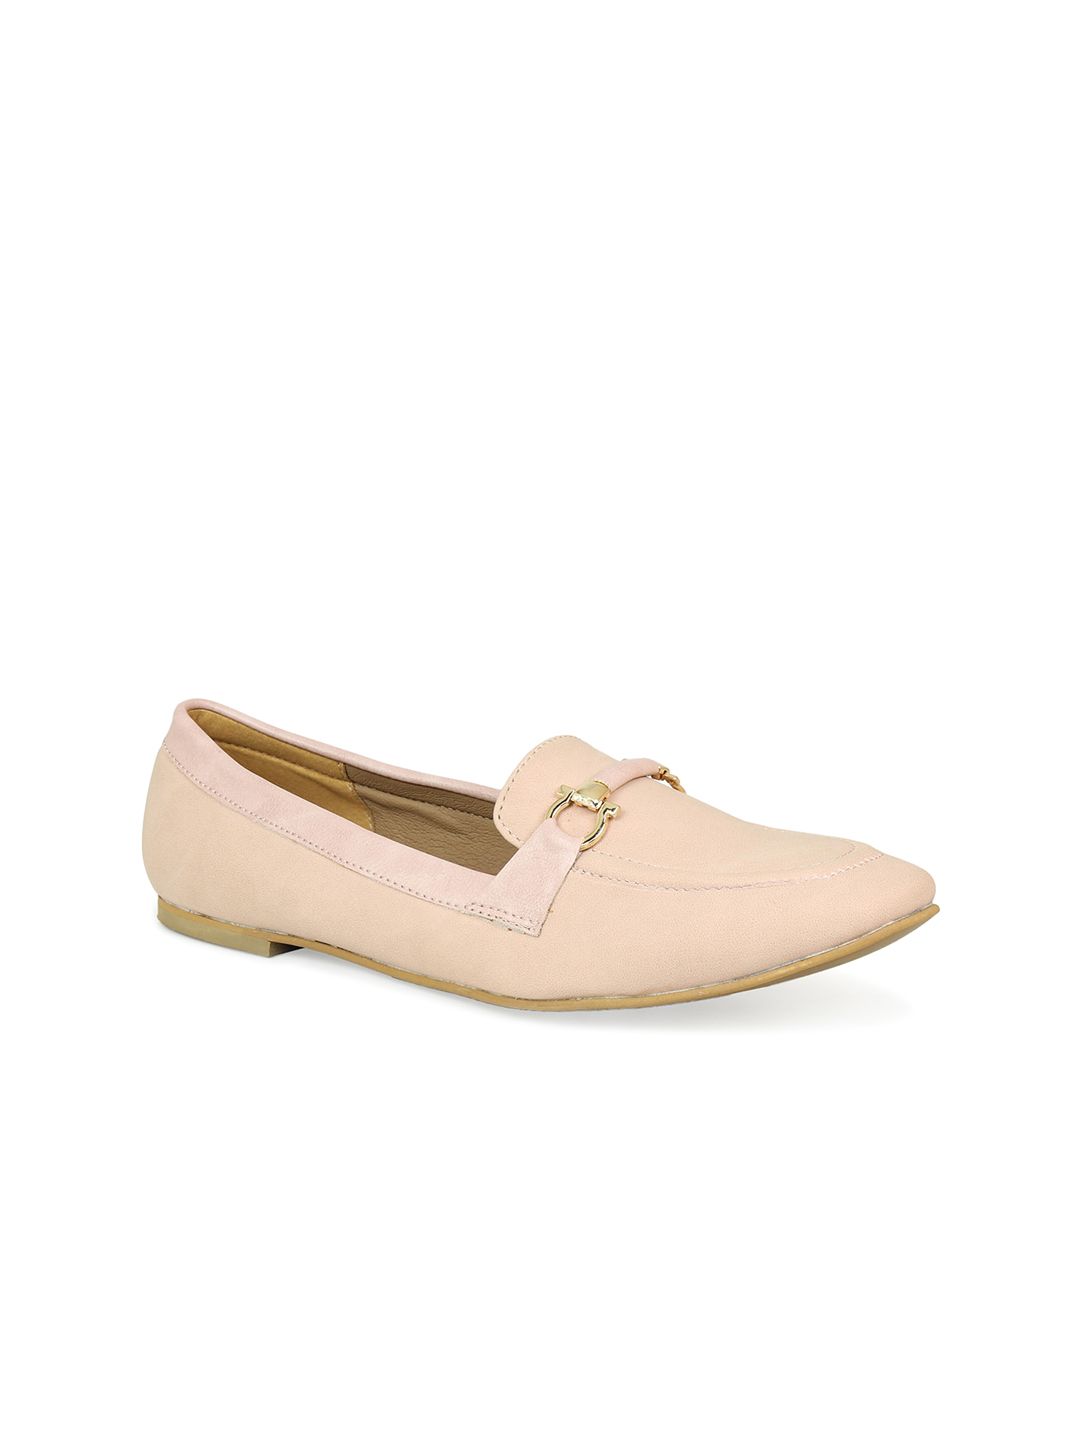 DESIGN CREW Women Pink Loafers Price in India